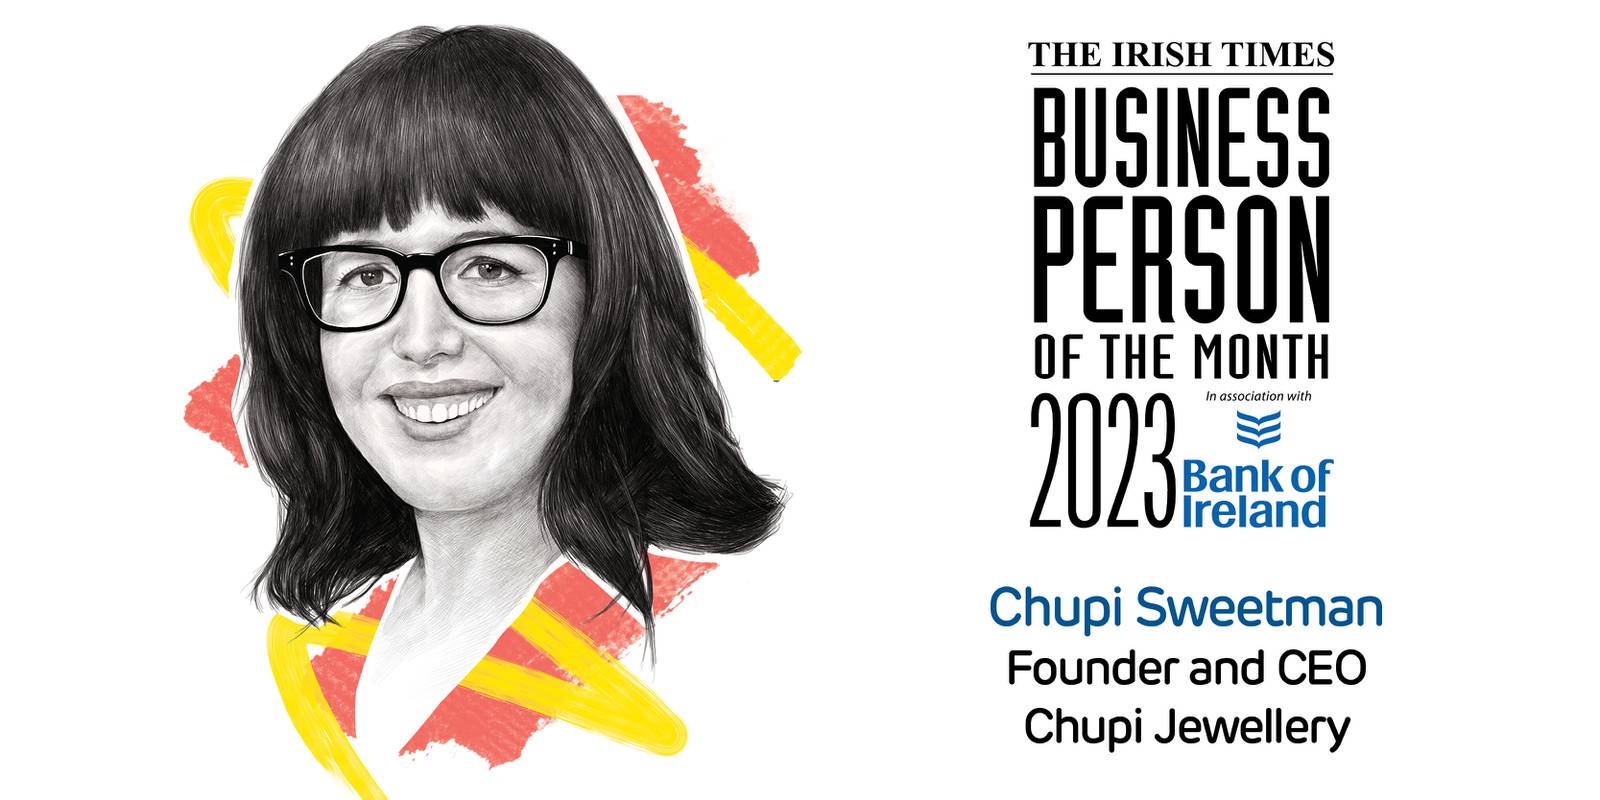 Chupi Sweetman, Businessperson of the Month for February